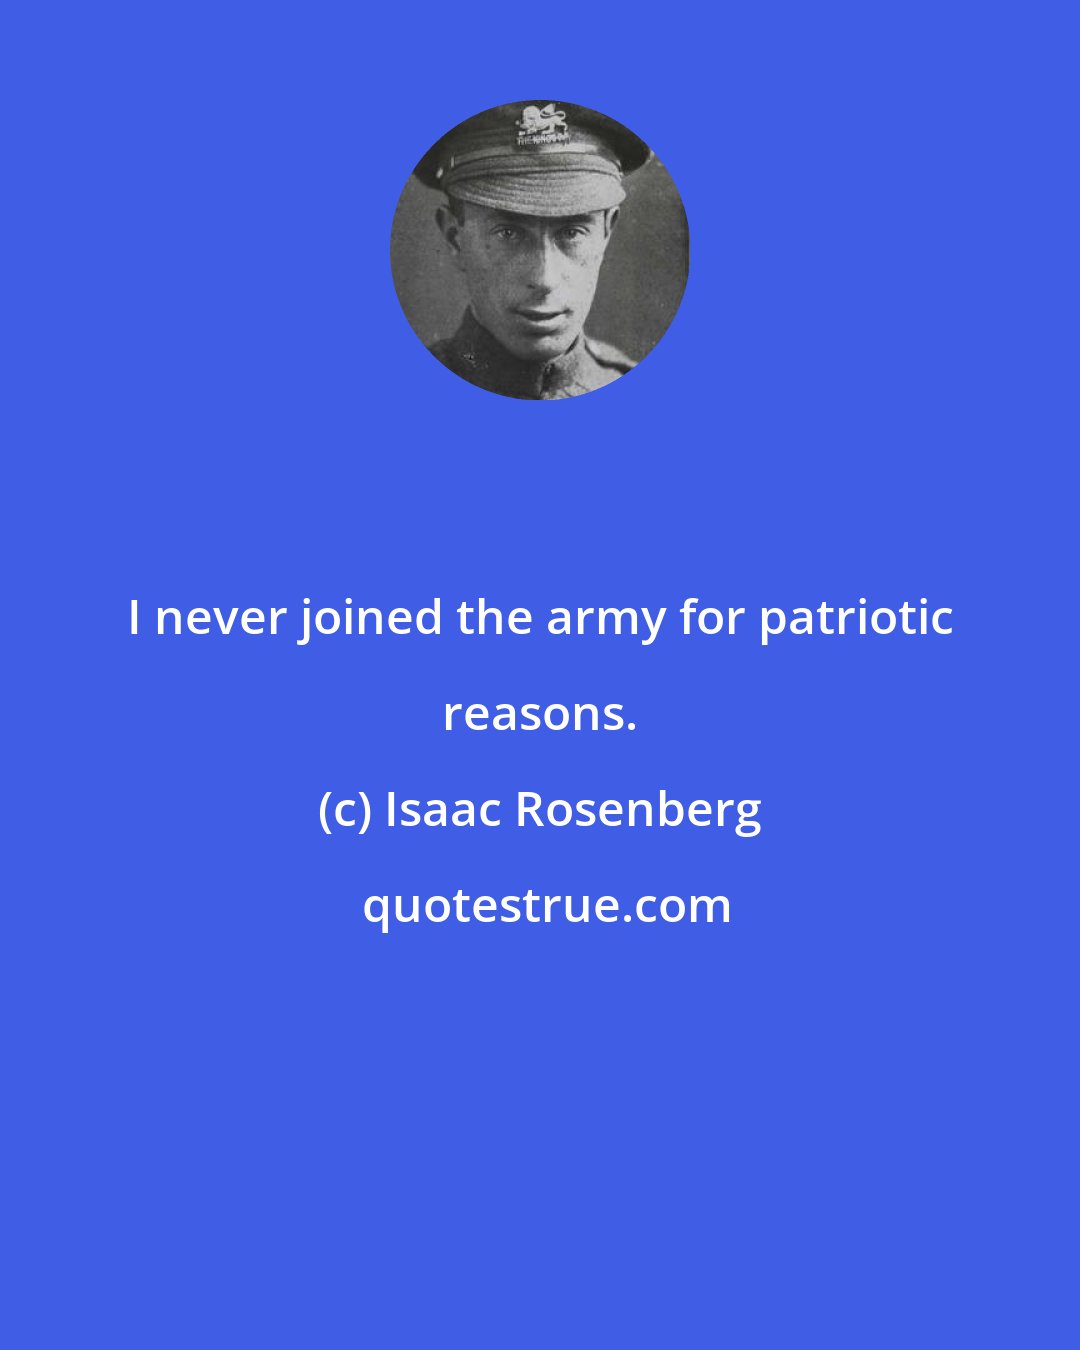 Isaac Rosenberg: I never joined the army for patriotic reasons.